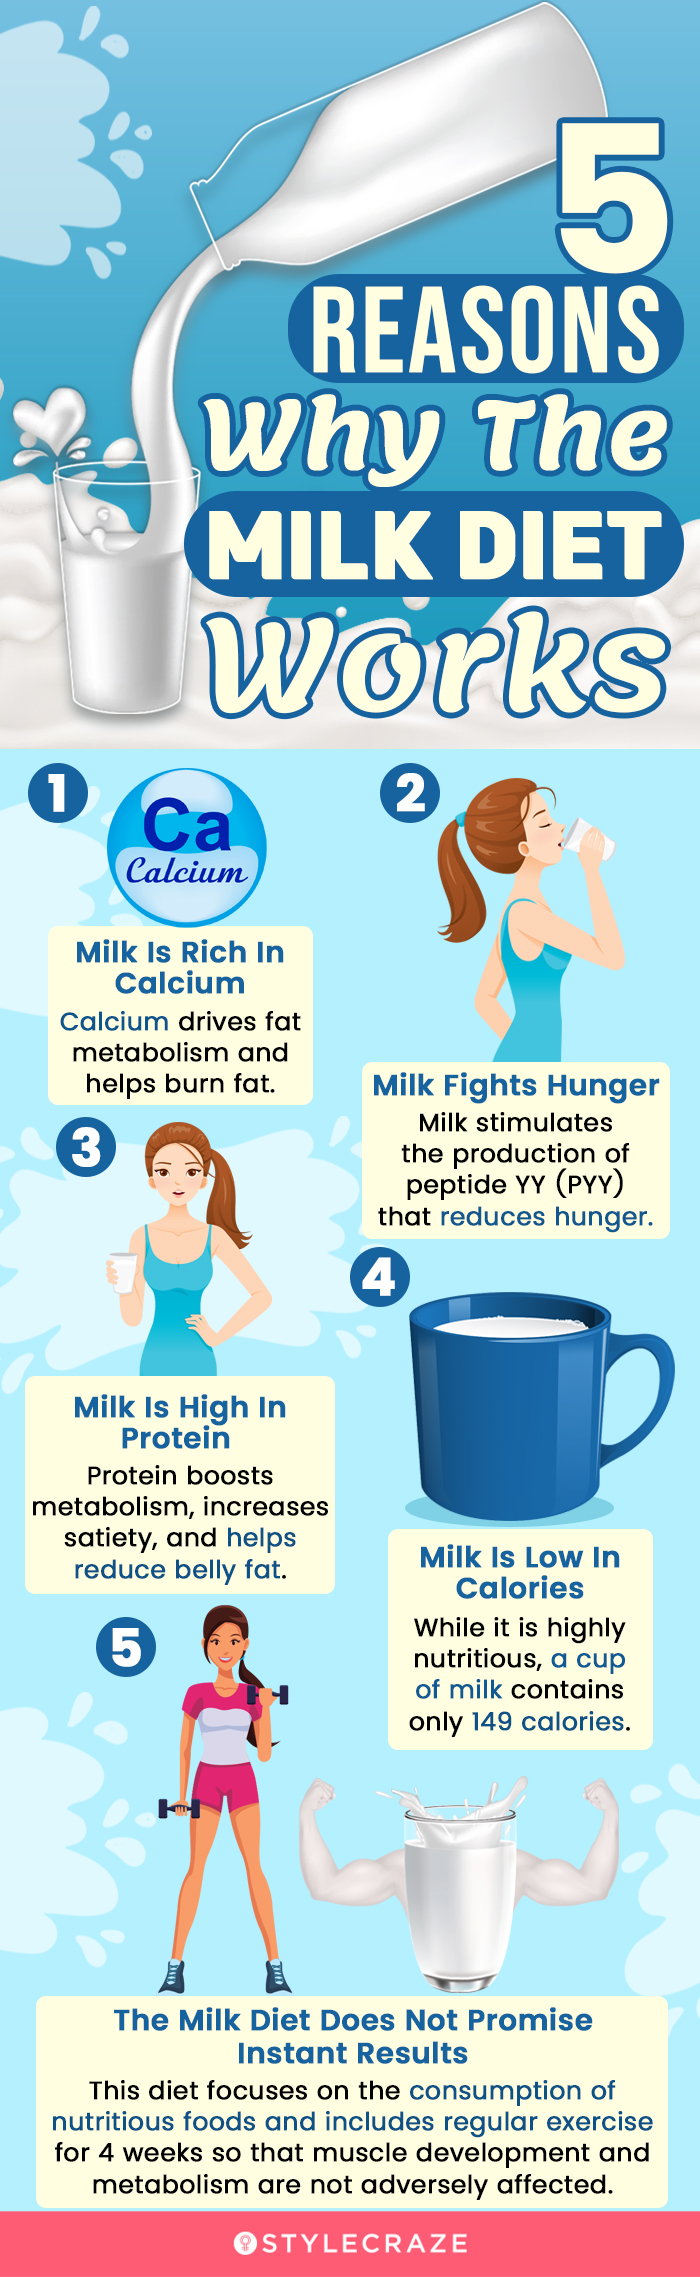 5 reasons why the milk diet works (infographic)